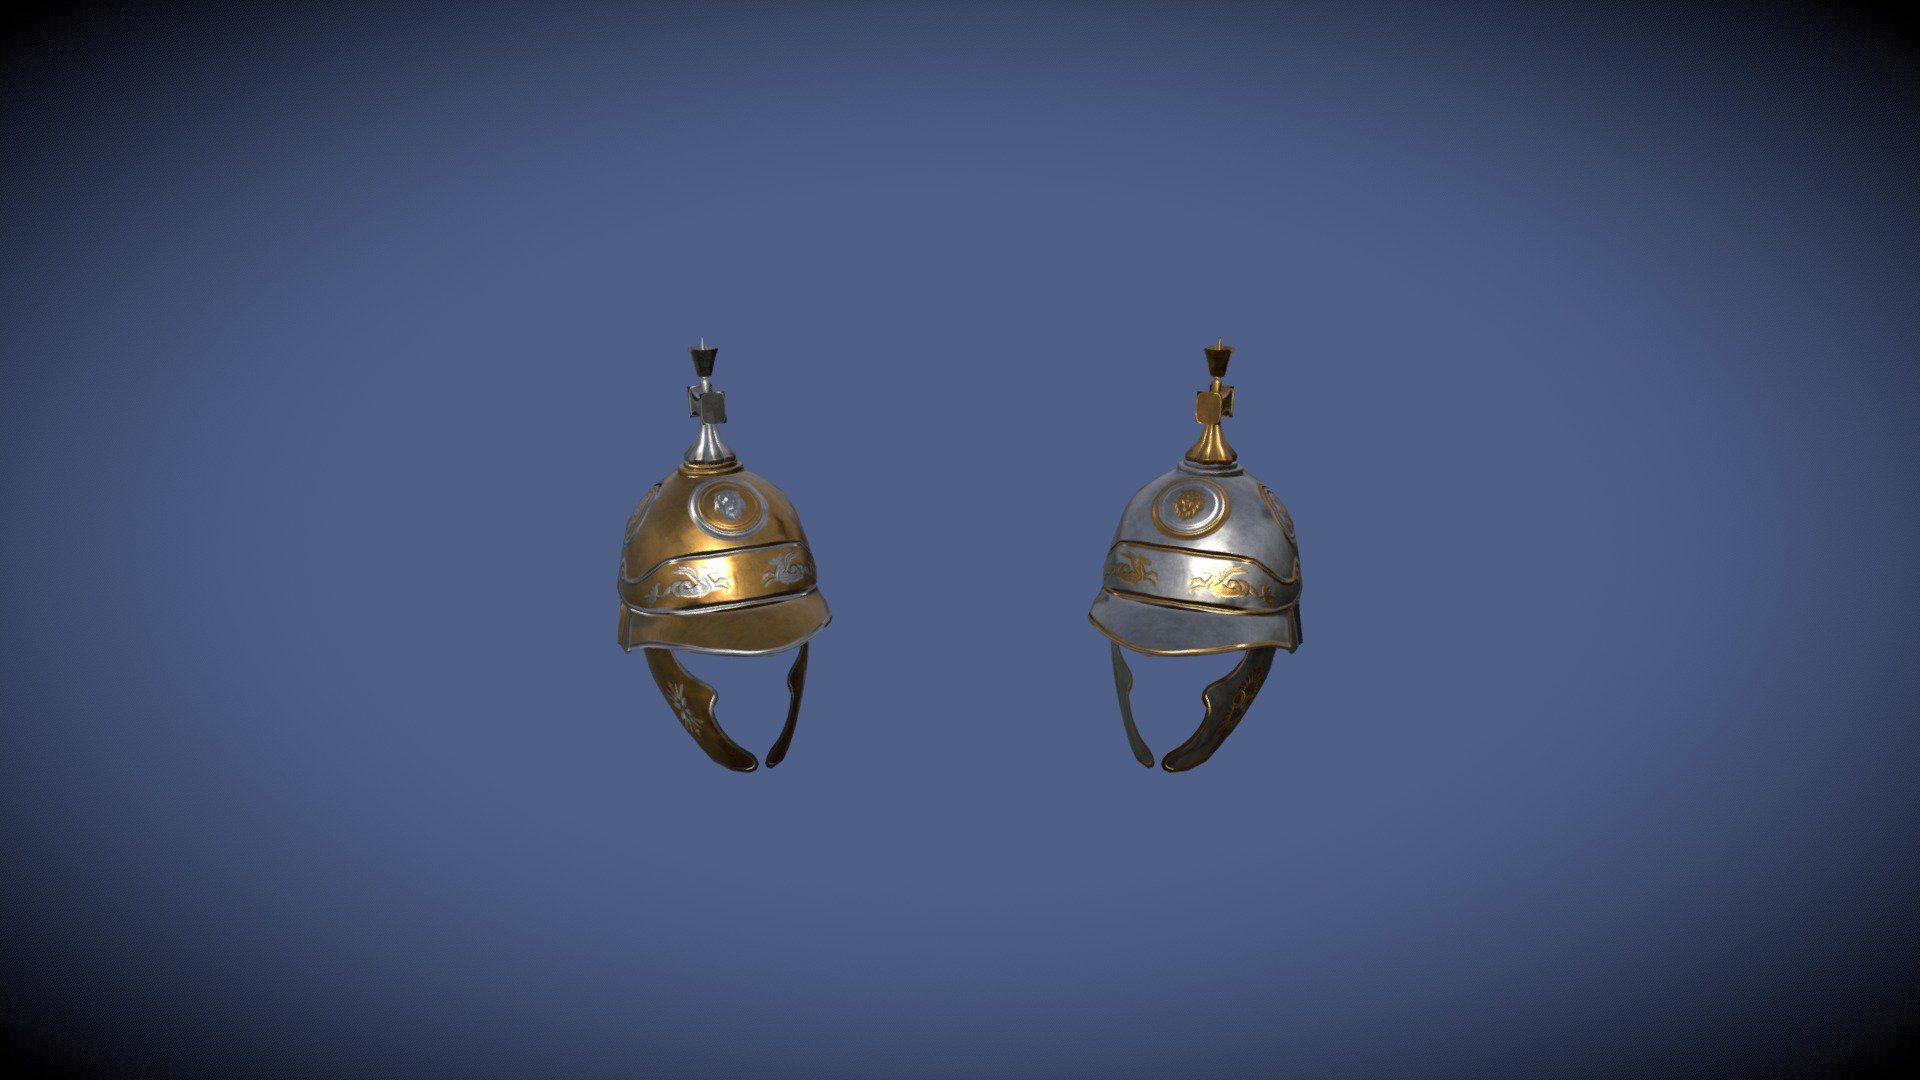 Helmet variations of the Konos group

Made for the RIR: Imperium Surrectum mod, for the game Rome Total War Remastered.

Made in Blender - 1070 vertices

The process consists of modelling a low poly version, from which a copy is made with a very high dense mesh where details are sculpted in, later baked onto its low poly counterpart.

The different colours are textured painted in - Konos Helmets - 3D model by João Paulo (@Grimbold) 3d model